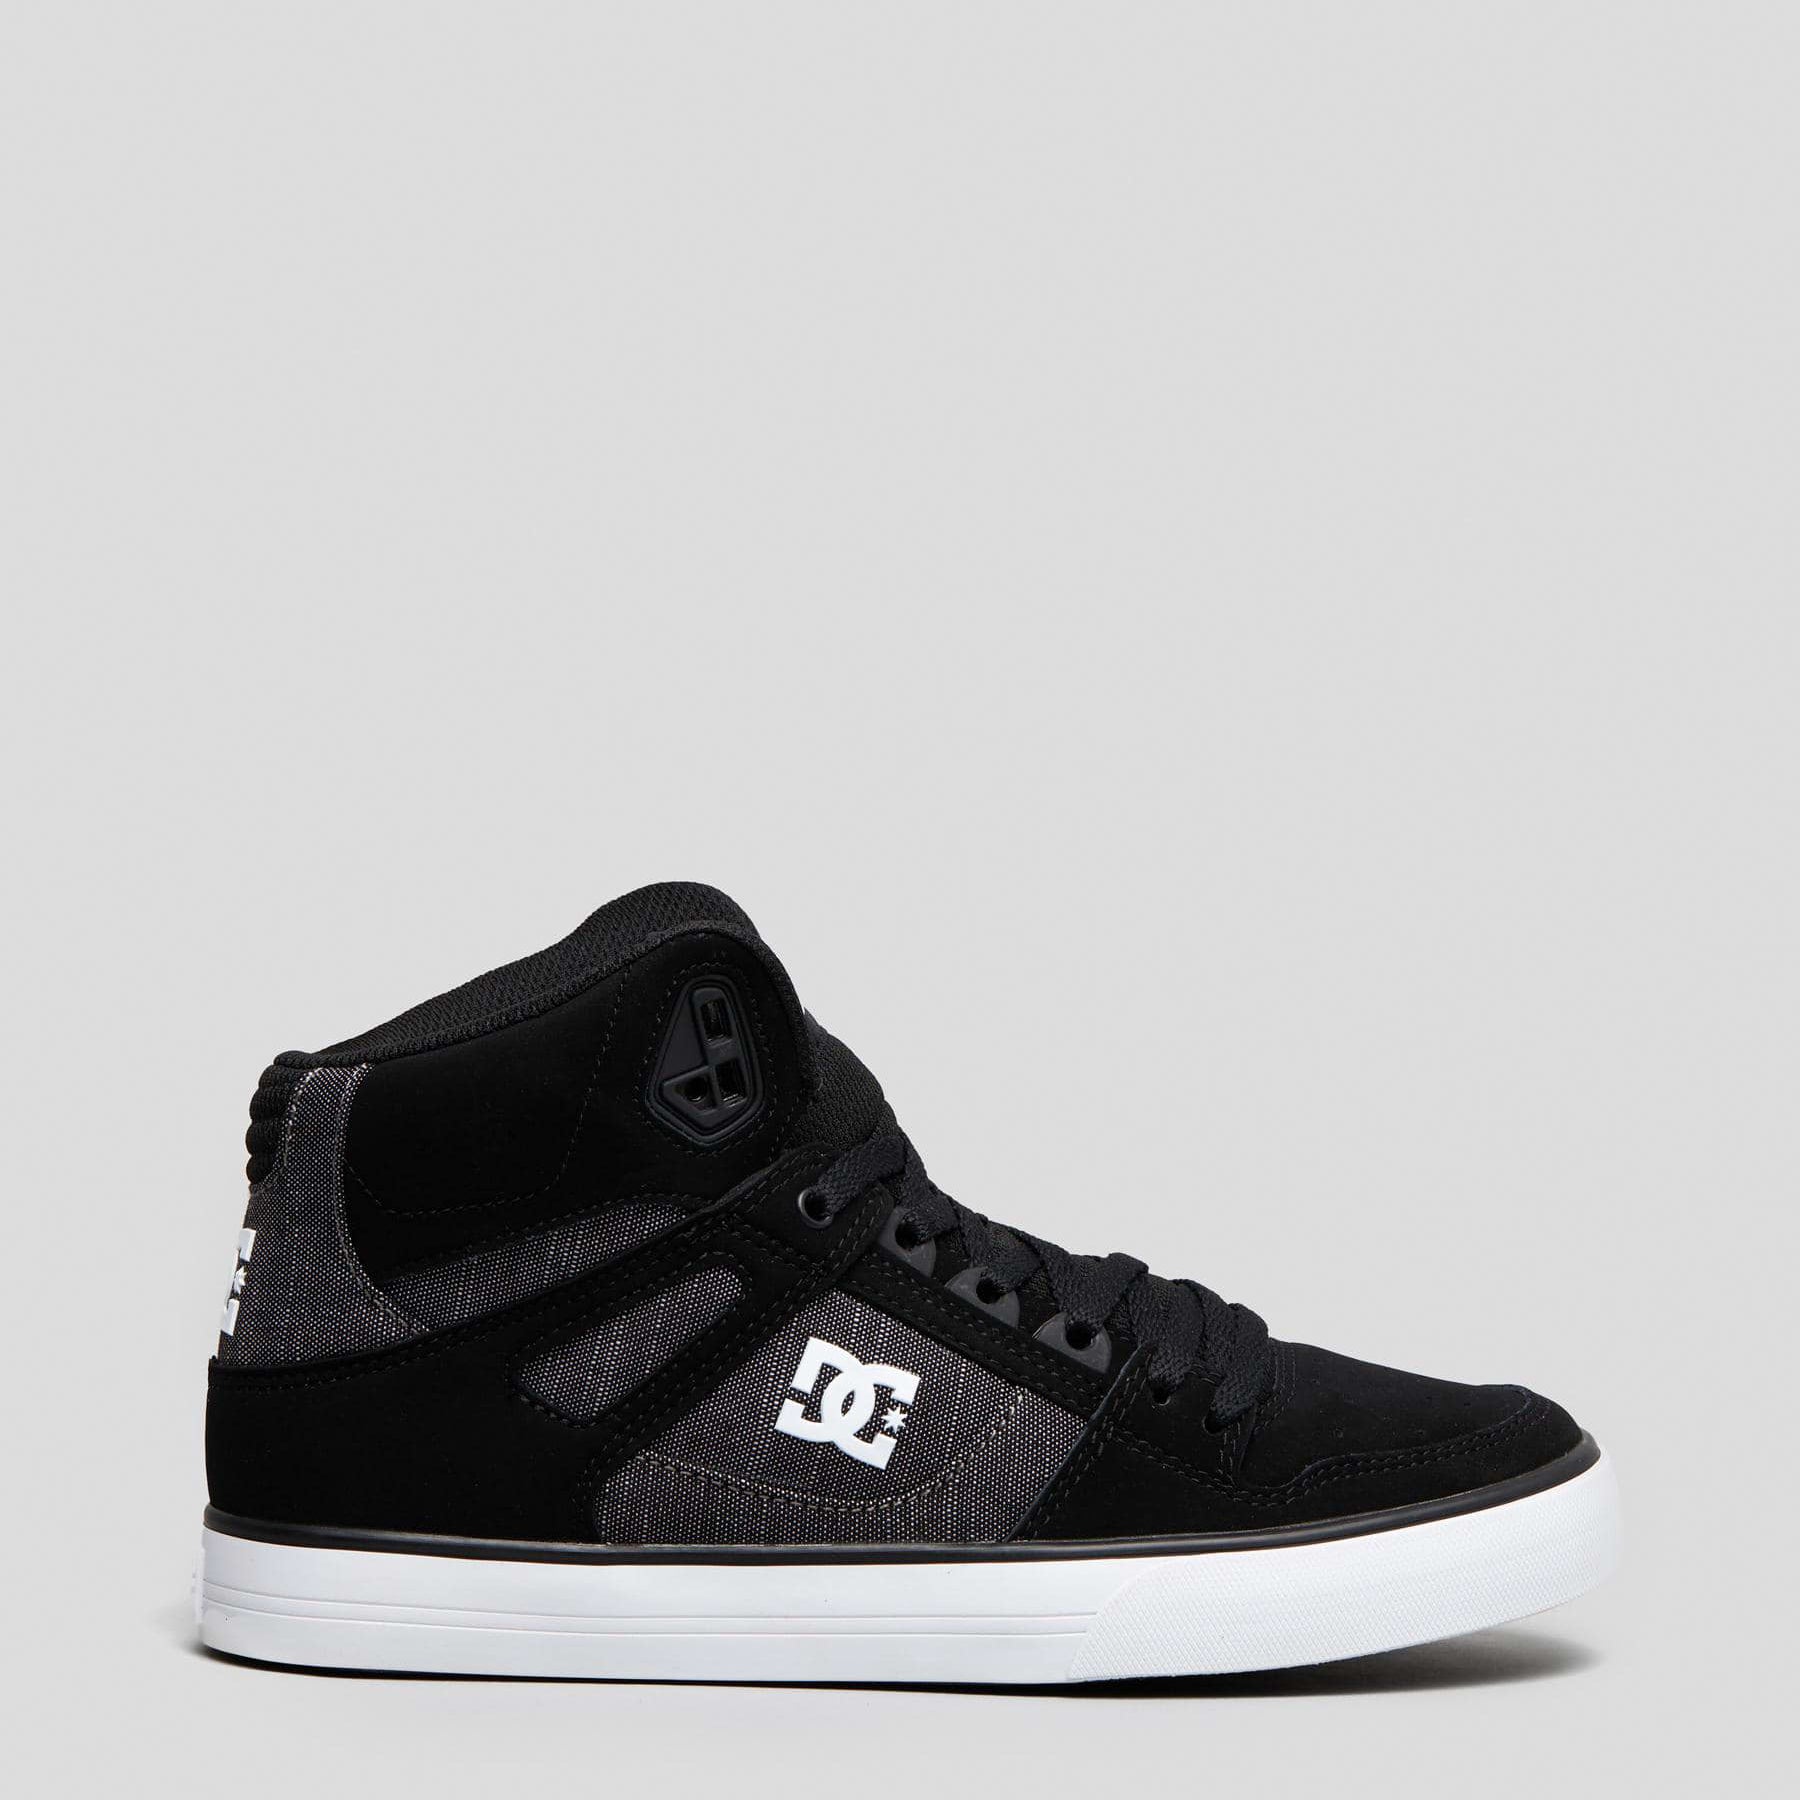 DC Shoes Pure High-Top WC